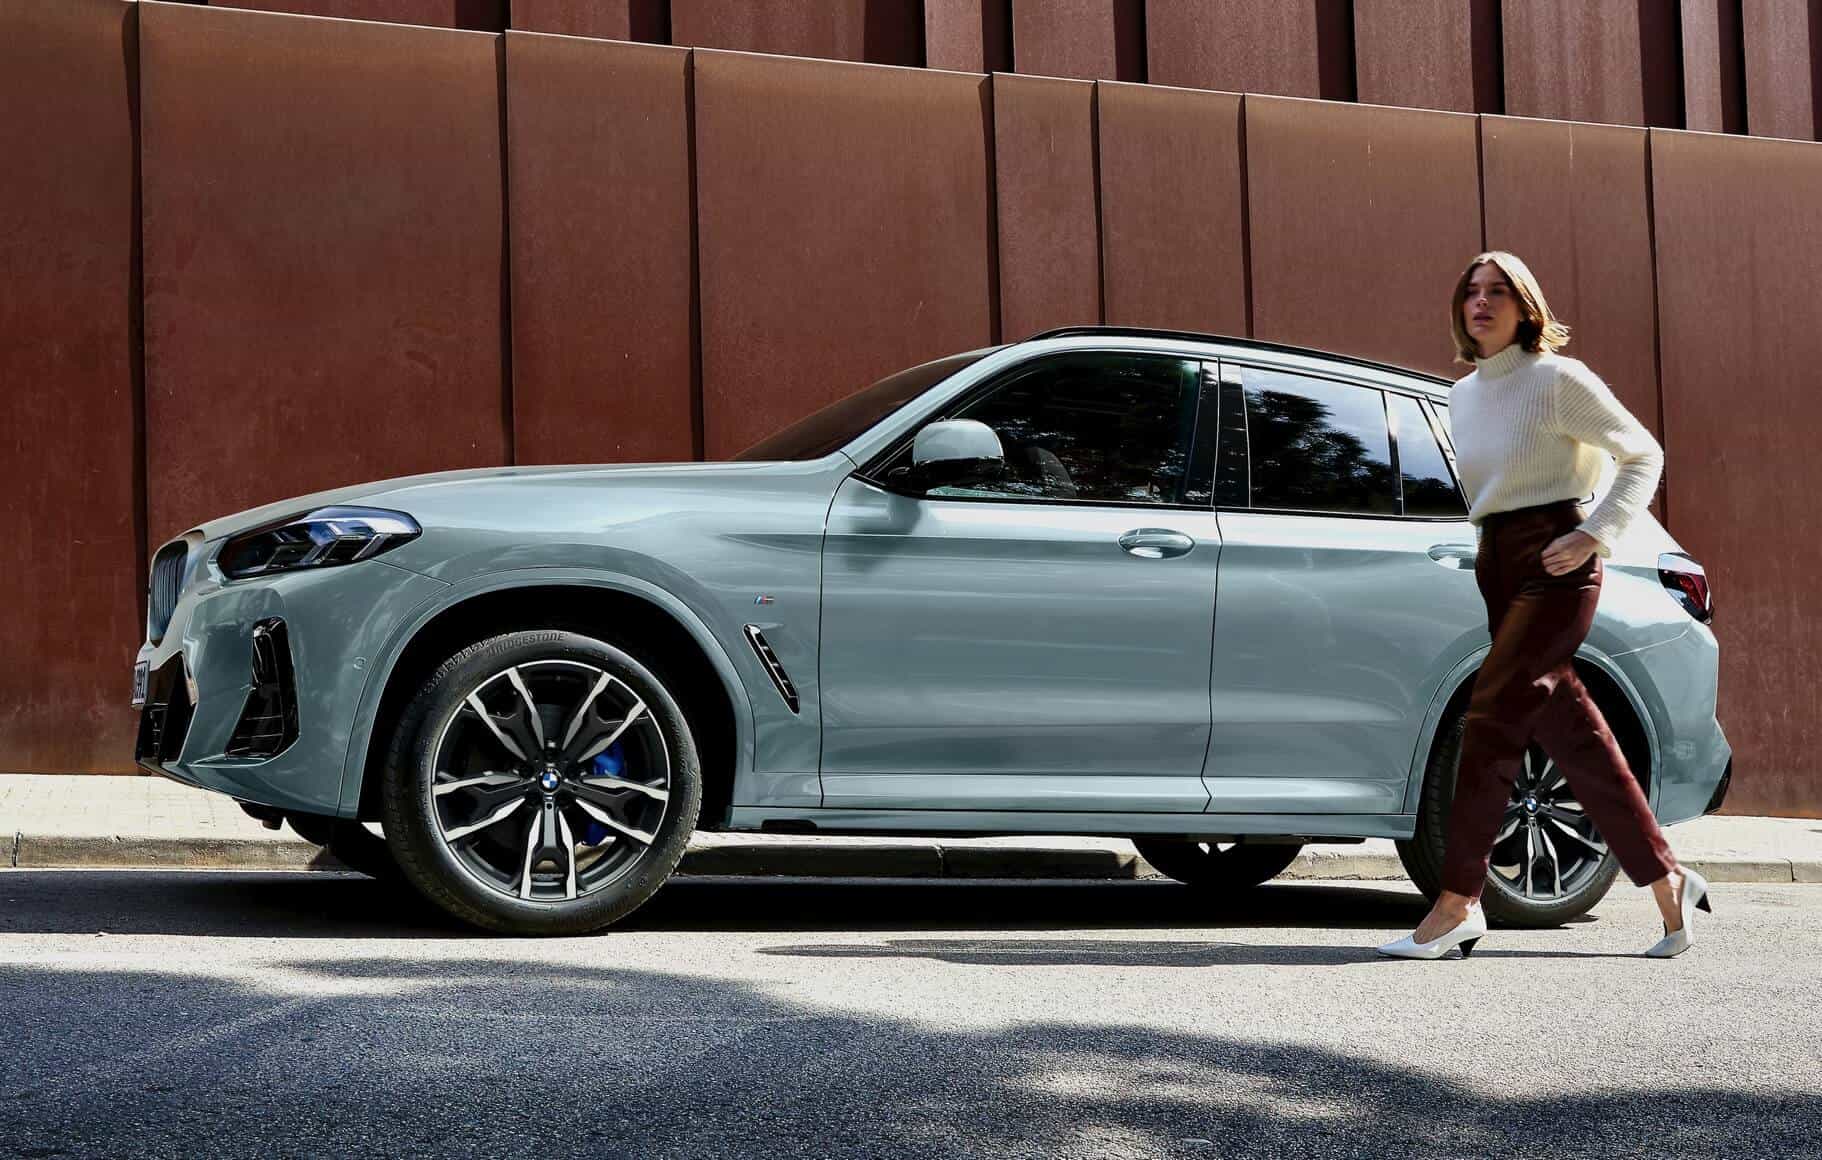 BMW X3 Sport Collection Launched With Generous Standard Equipment